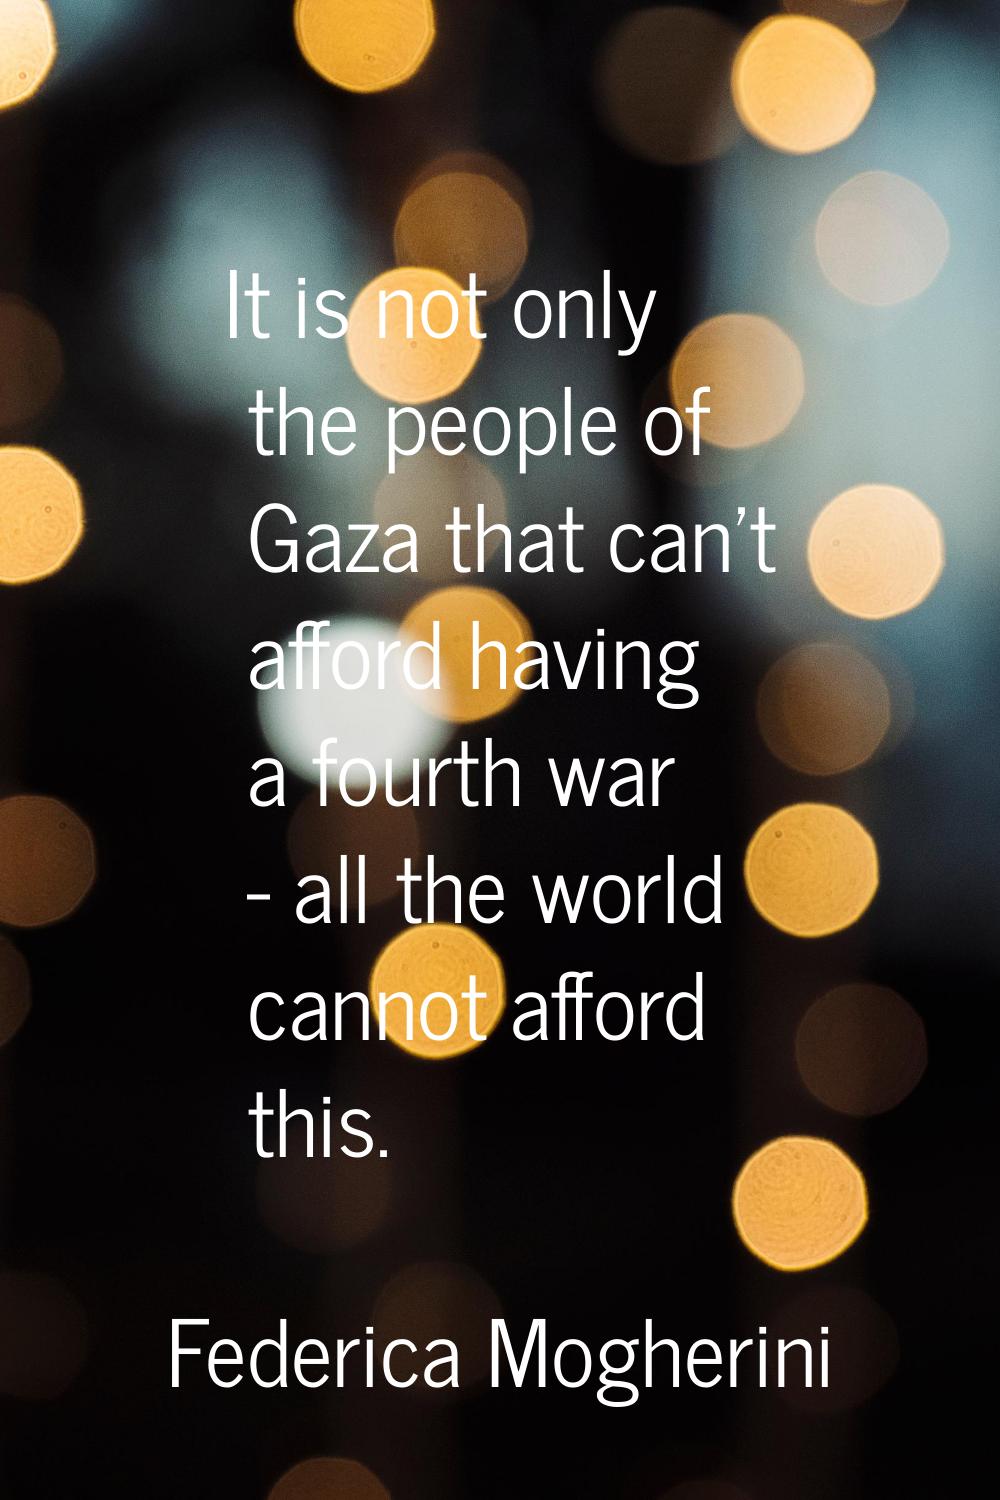 It is not only the people of Gaza that can't afford having a fourth war - all the world cannot affo